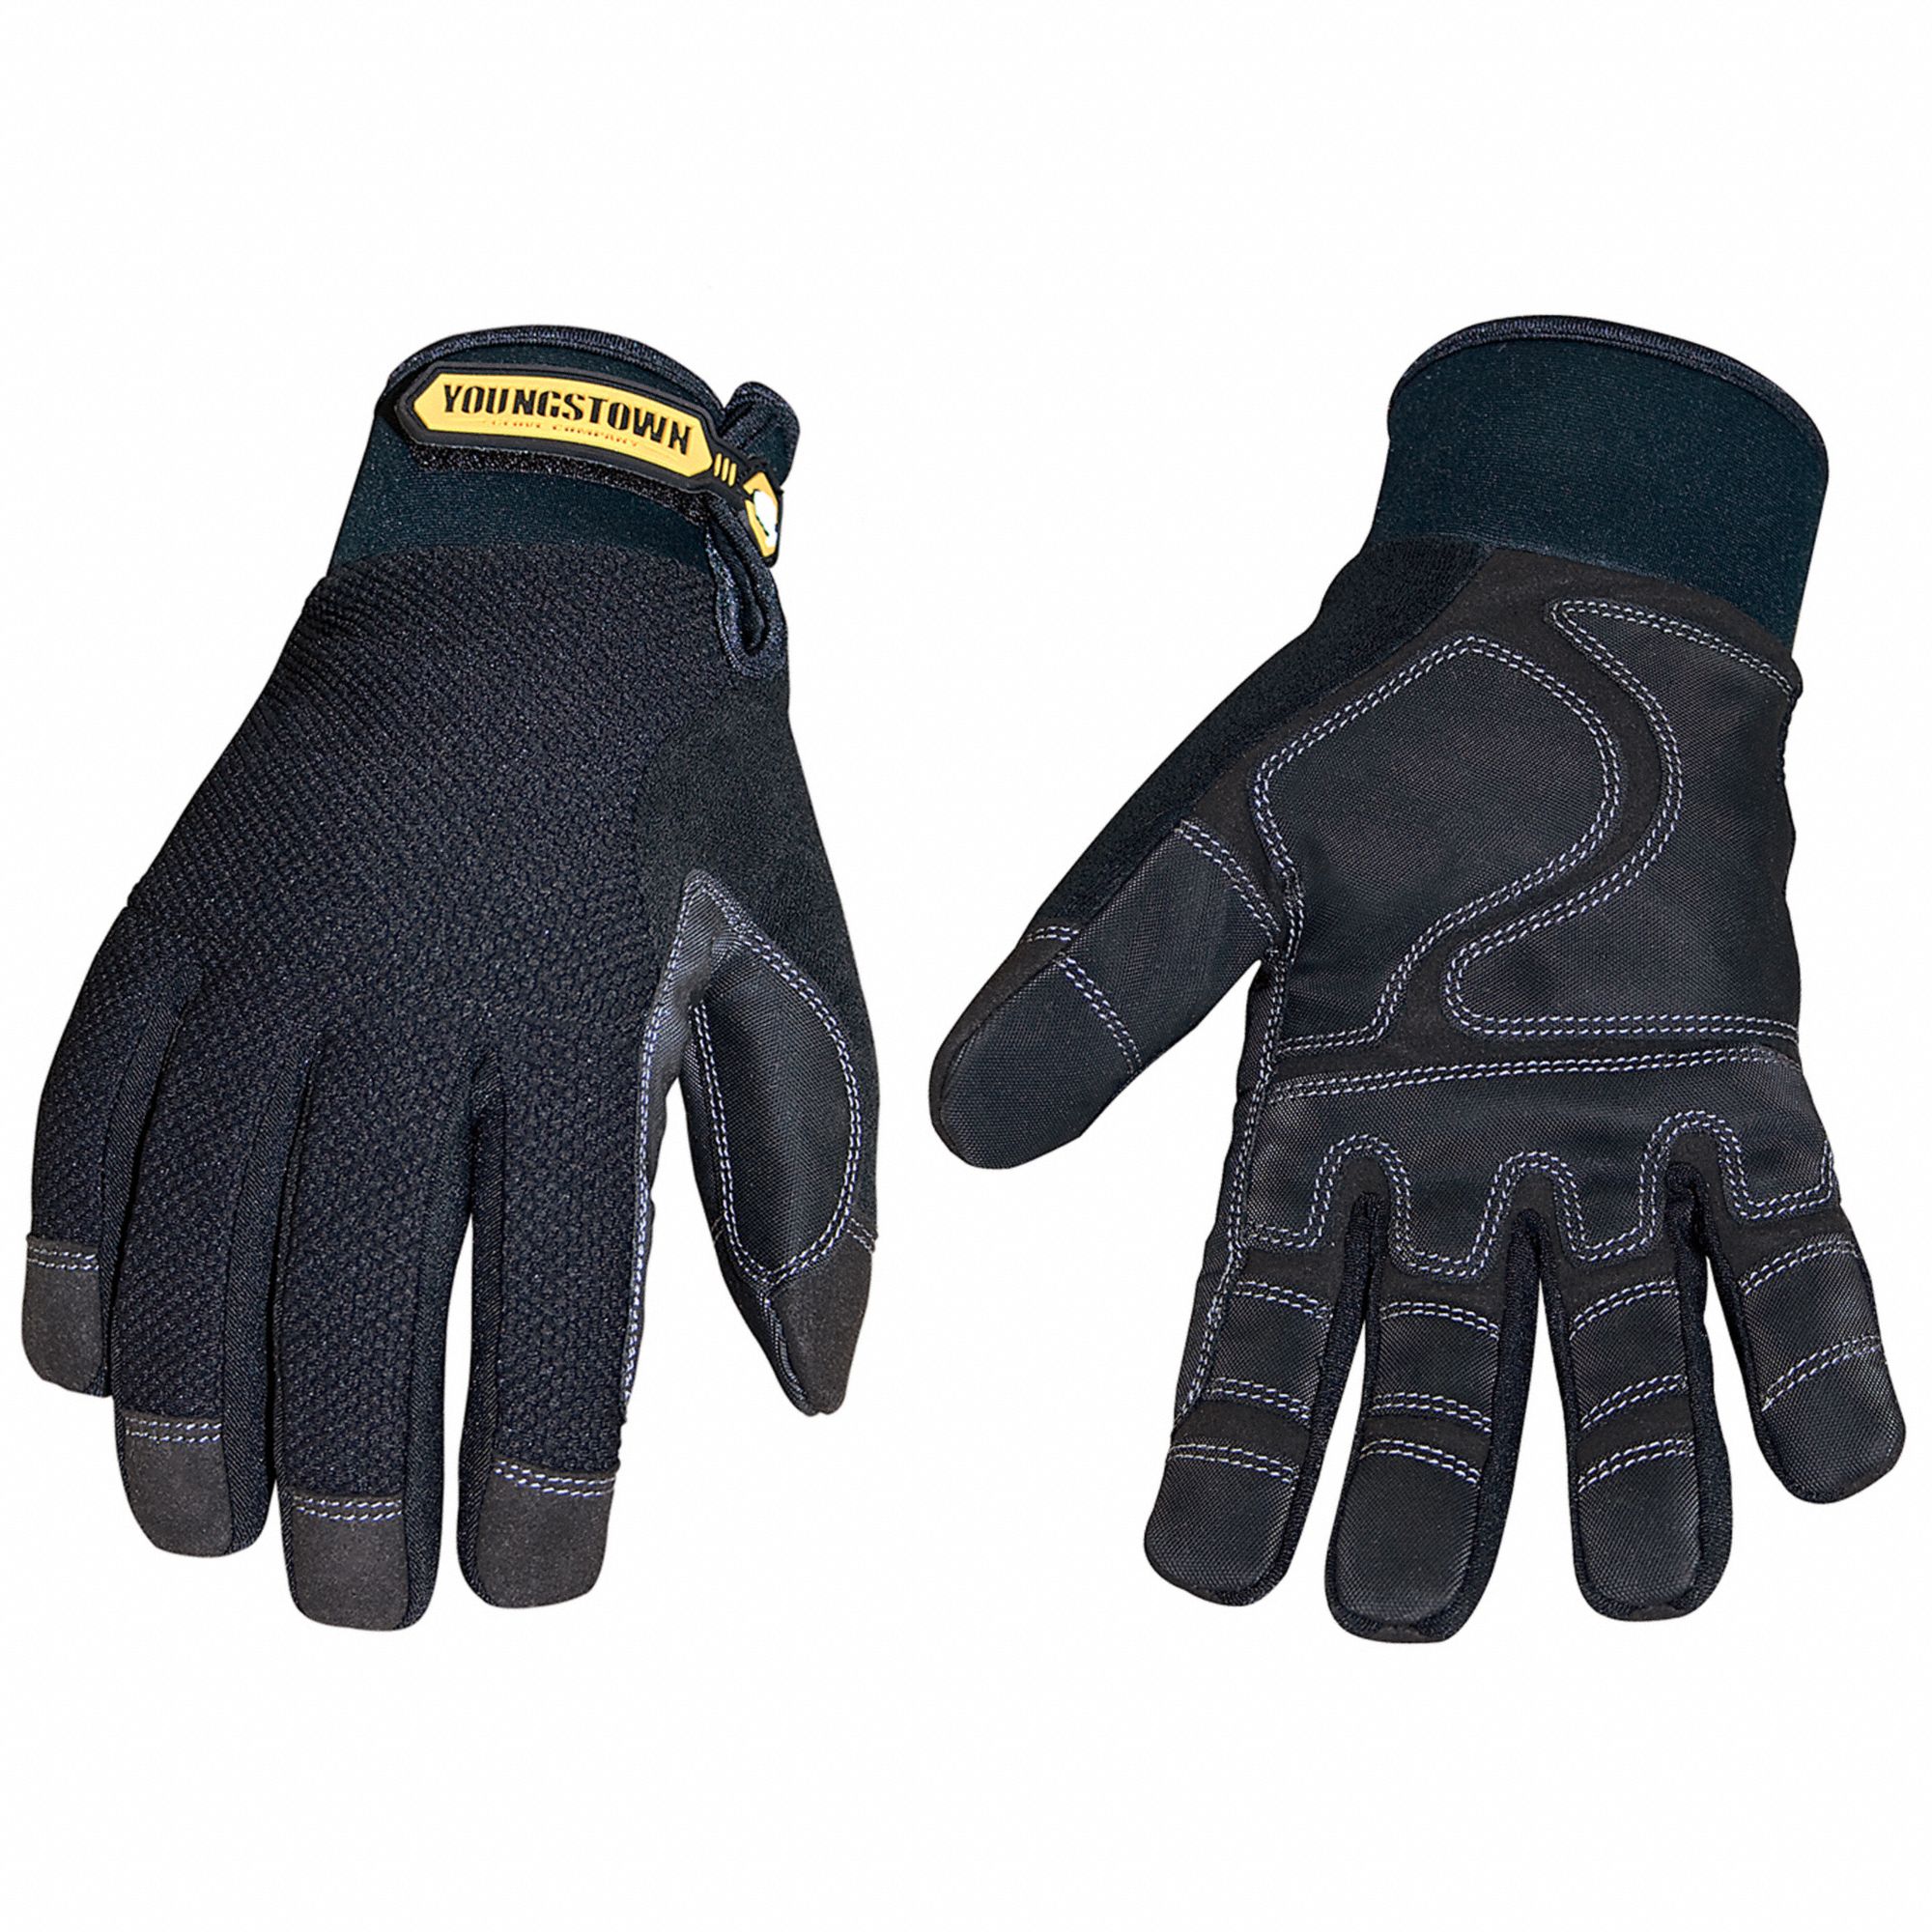 Winter Glove, Warm, Waterproof, Thinsulate: Nylon, Synthetic Leather, 1 PR